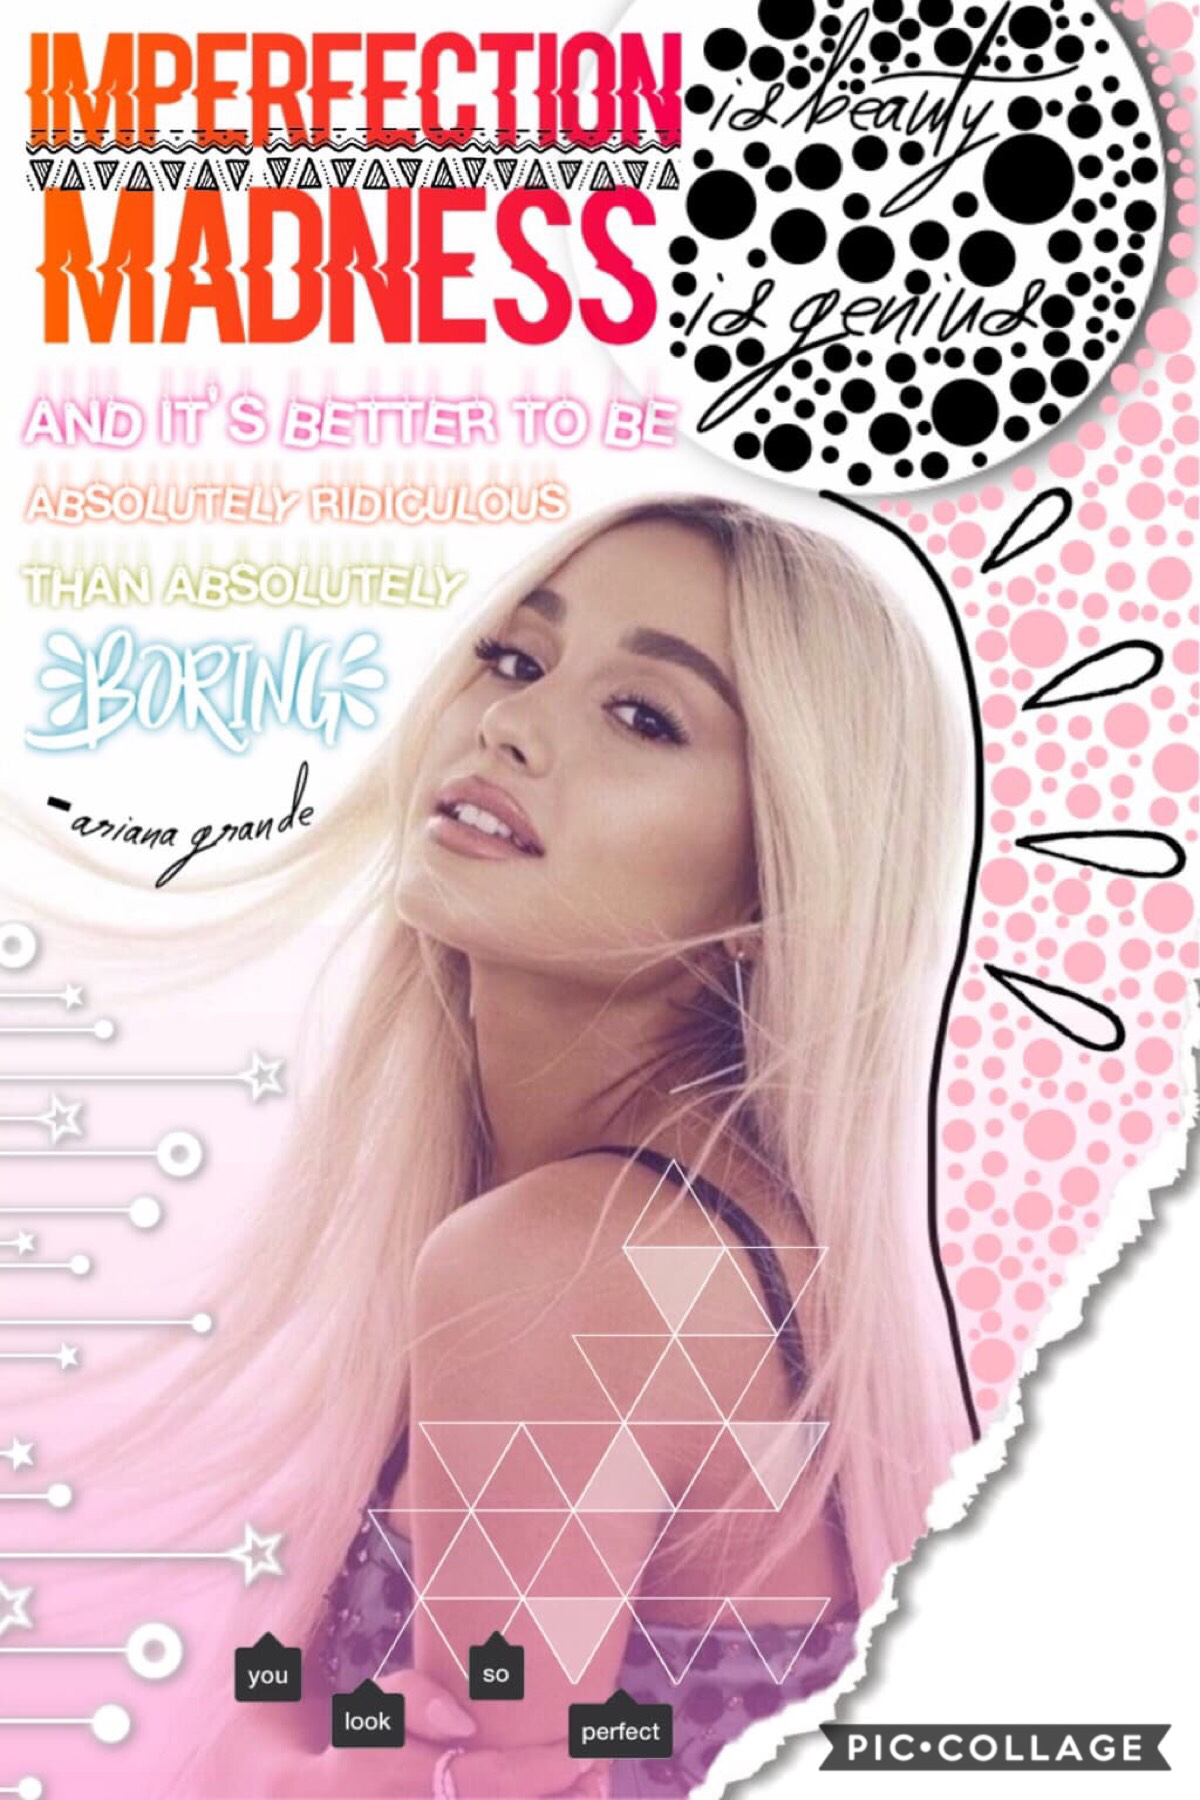 Tap!!!
As everyone knows, I love Ariana Grande... so I decided to make a collage about her. I made an Ariana Grande edit once but didn't like it so I deleted that and I posted this. Also, just in case you can't see it clearly, it says "Imperfection is bea